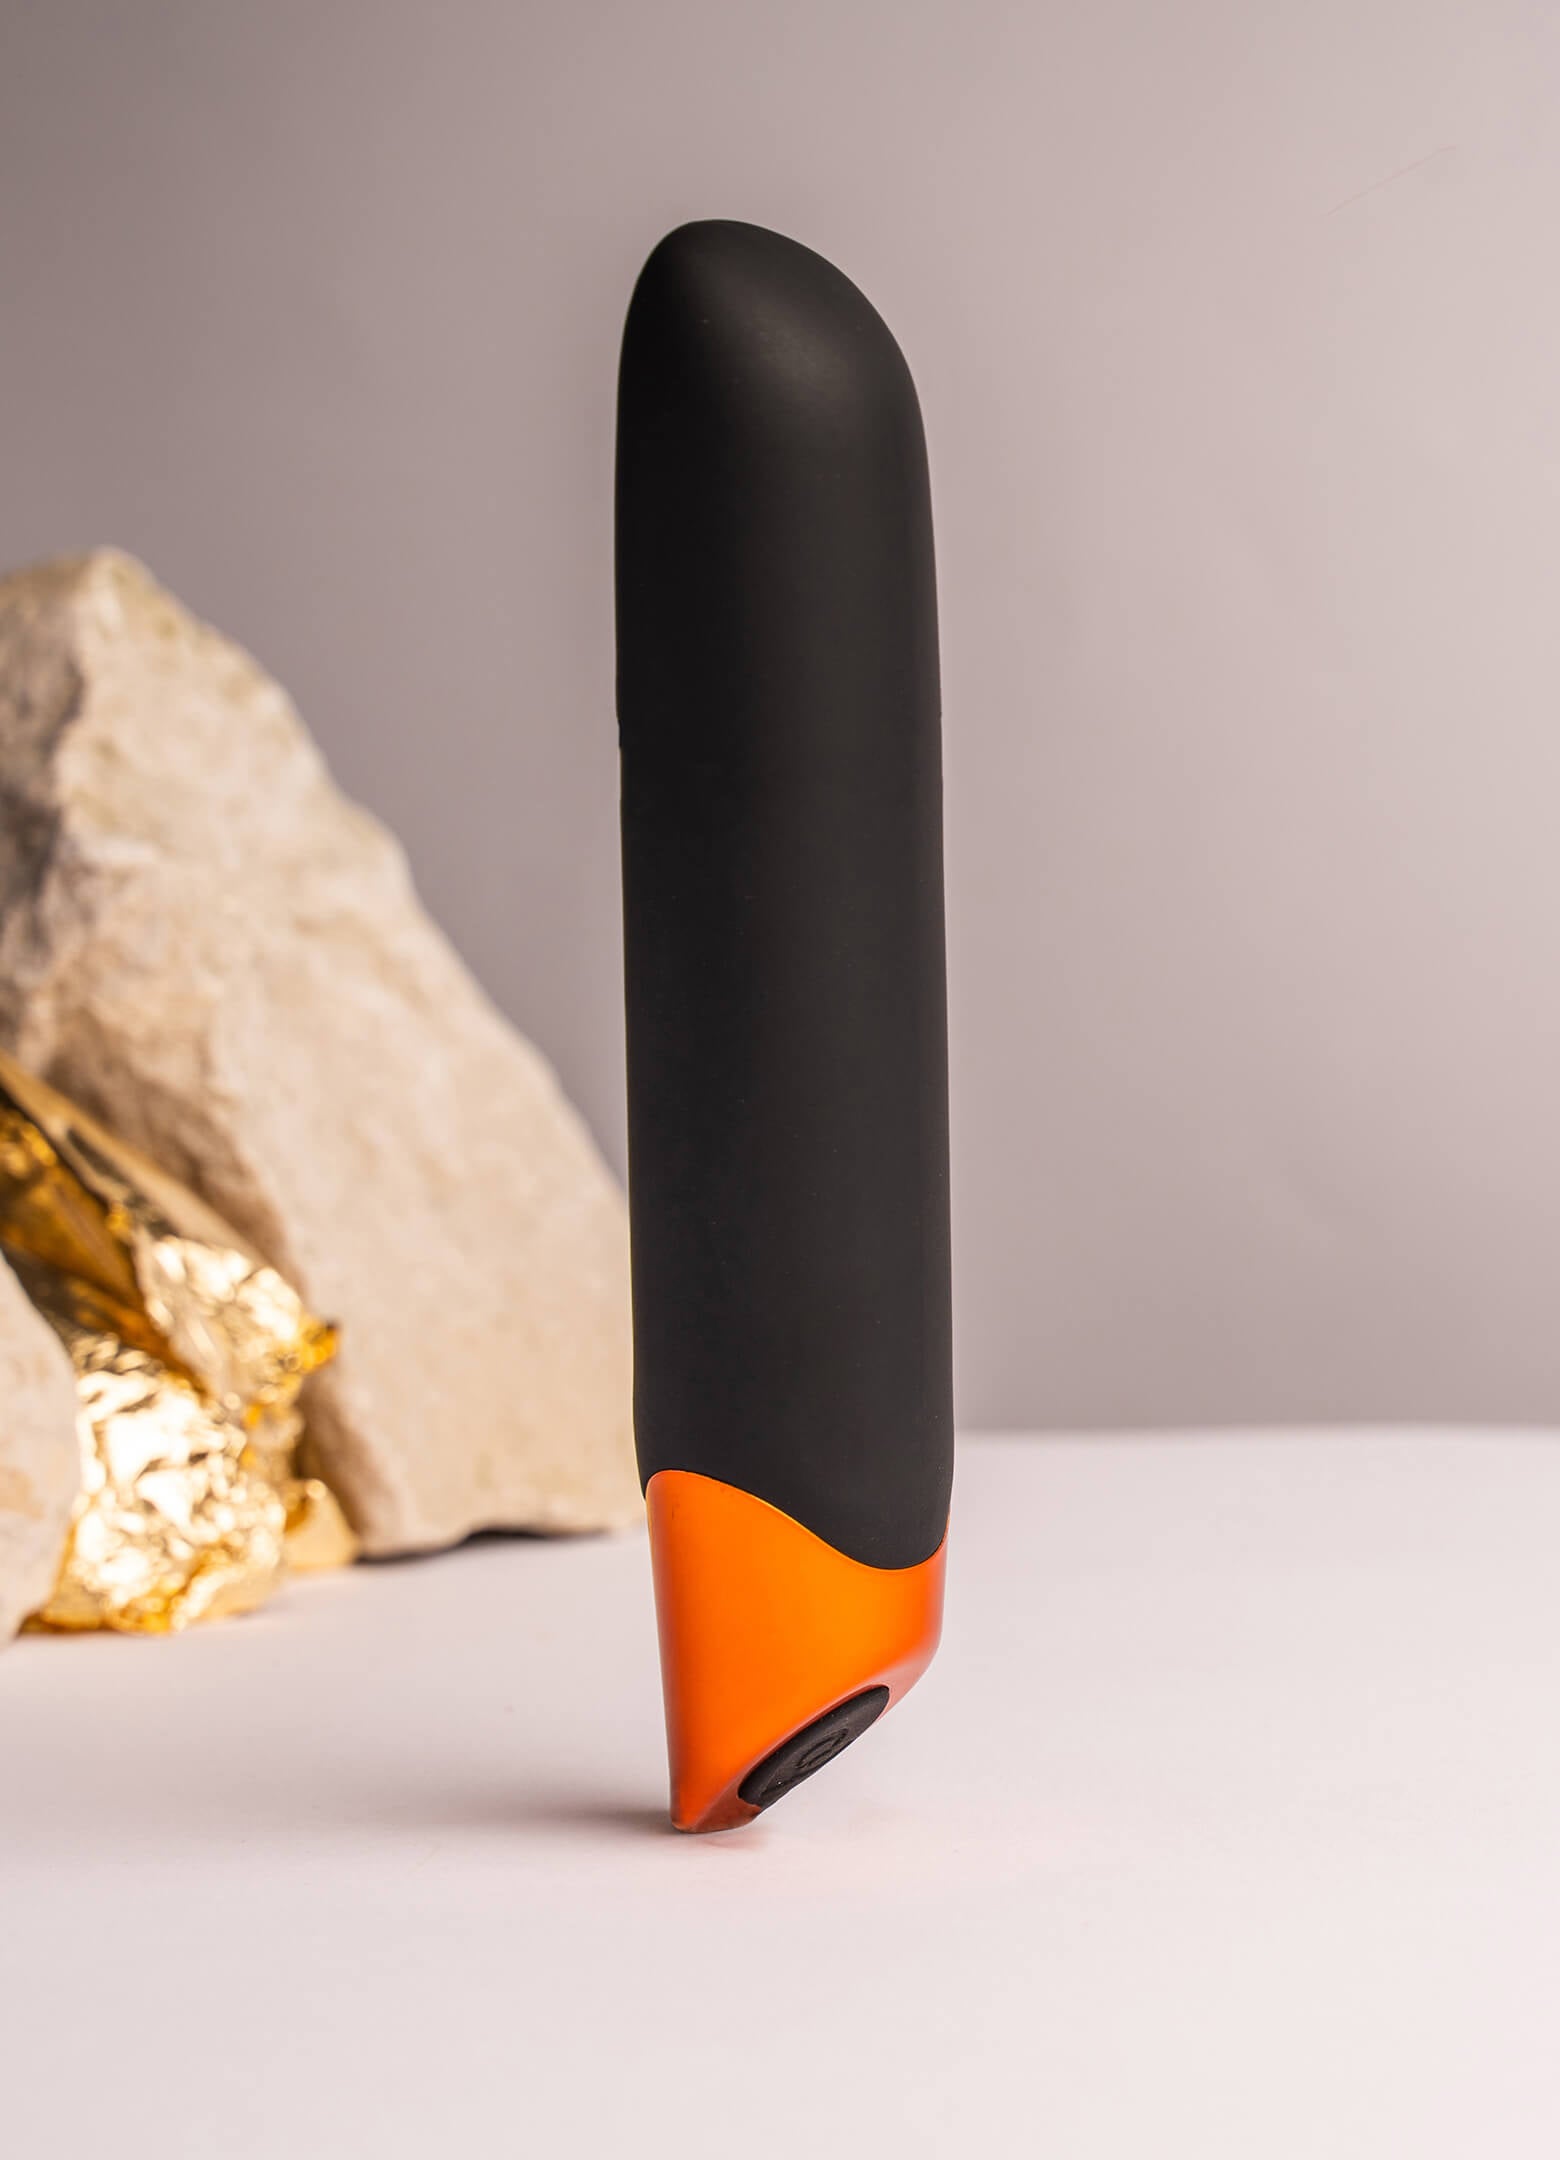 Elegant black and copper vibrator with a chiseled tip.